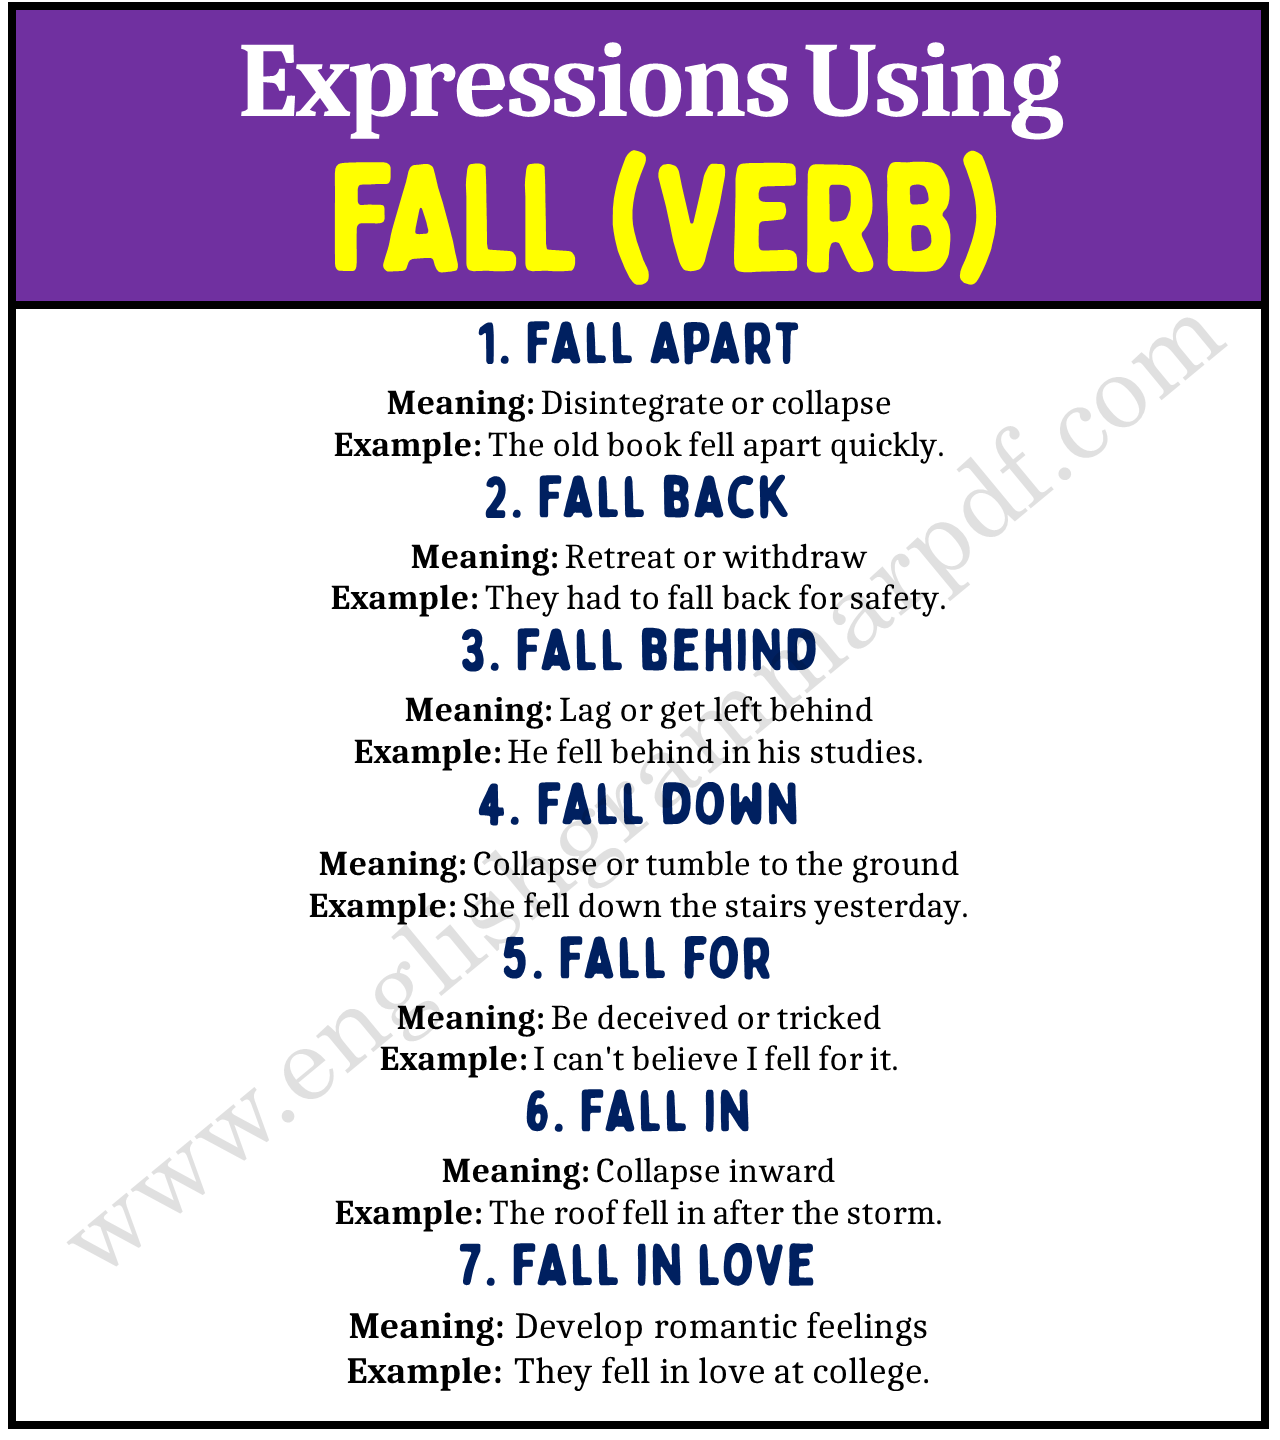 Expressions Using the Verb FALL